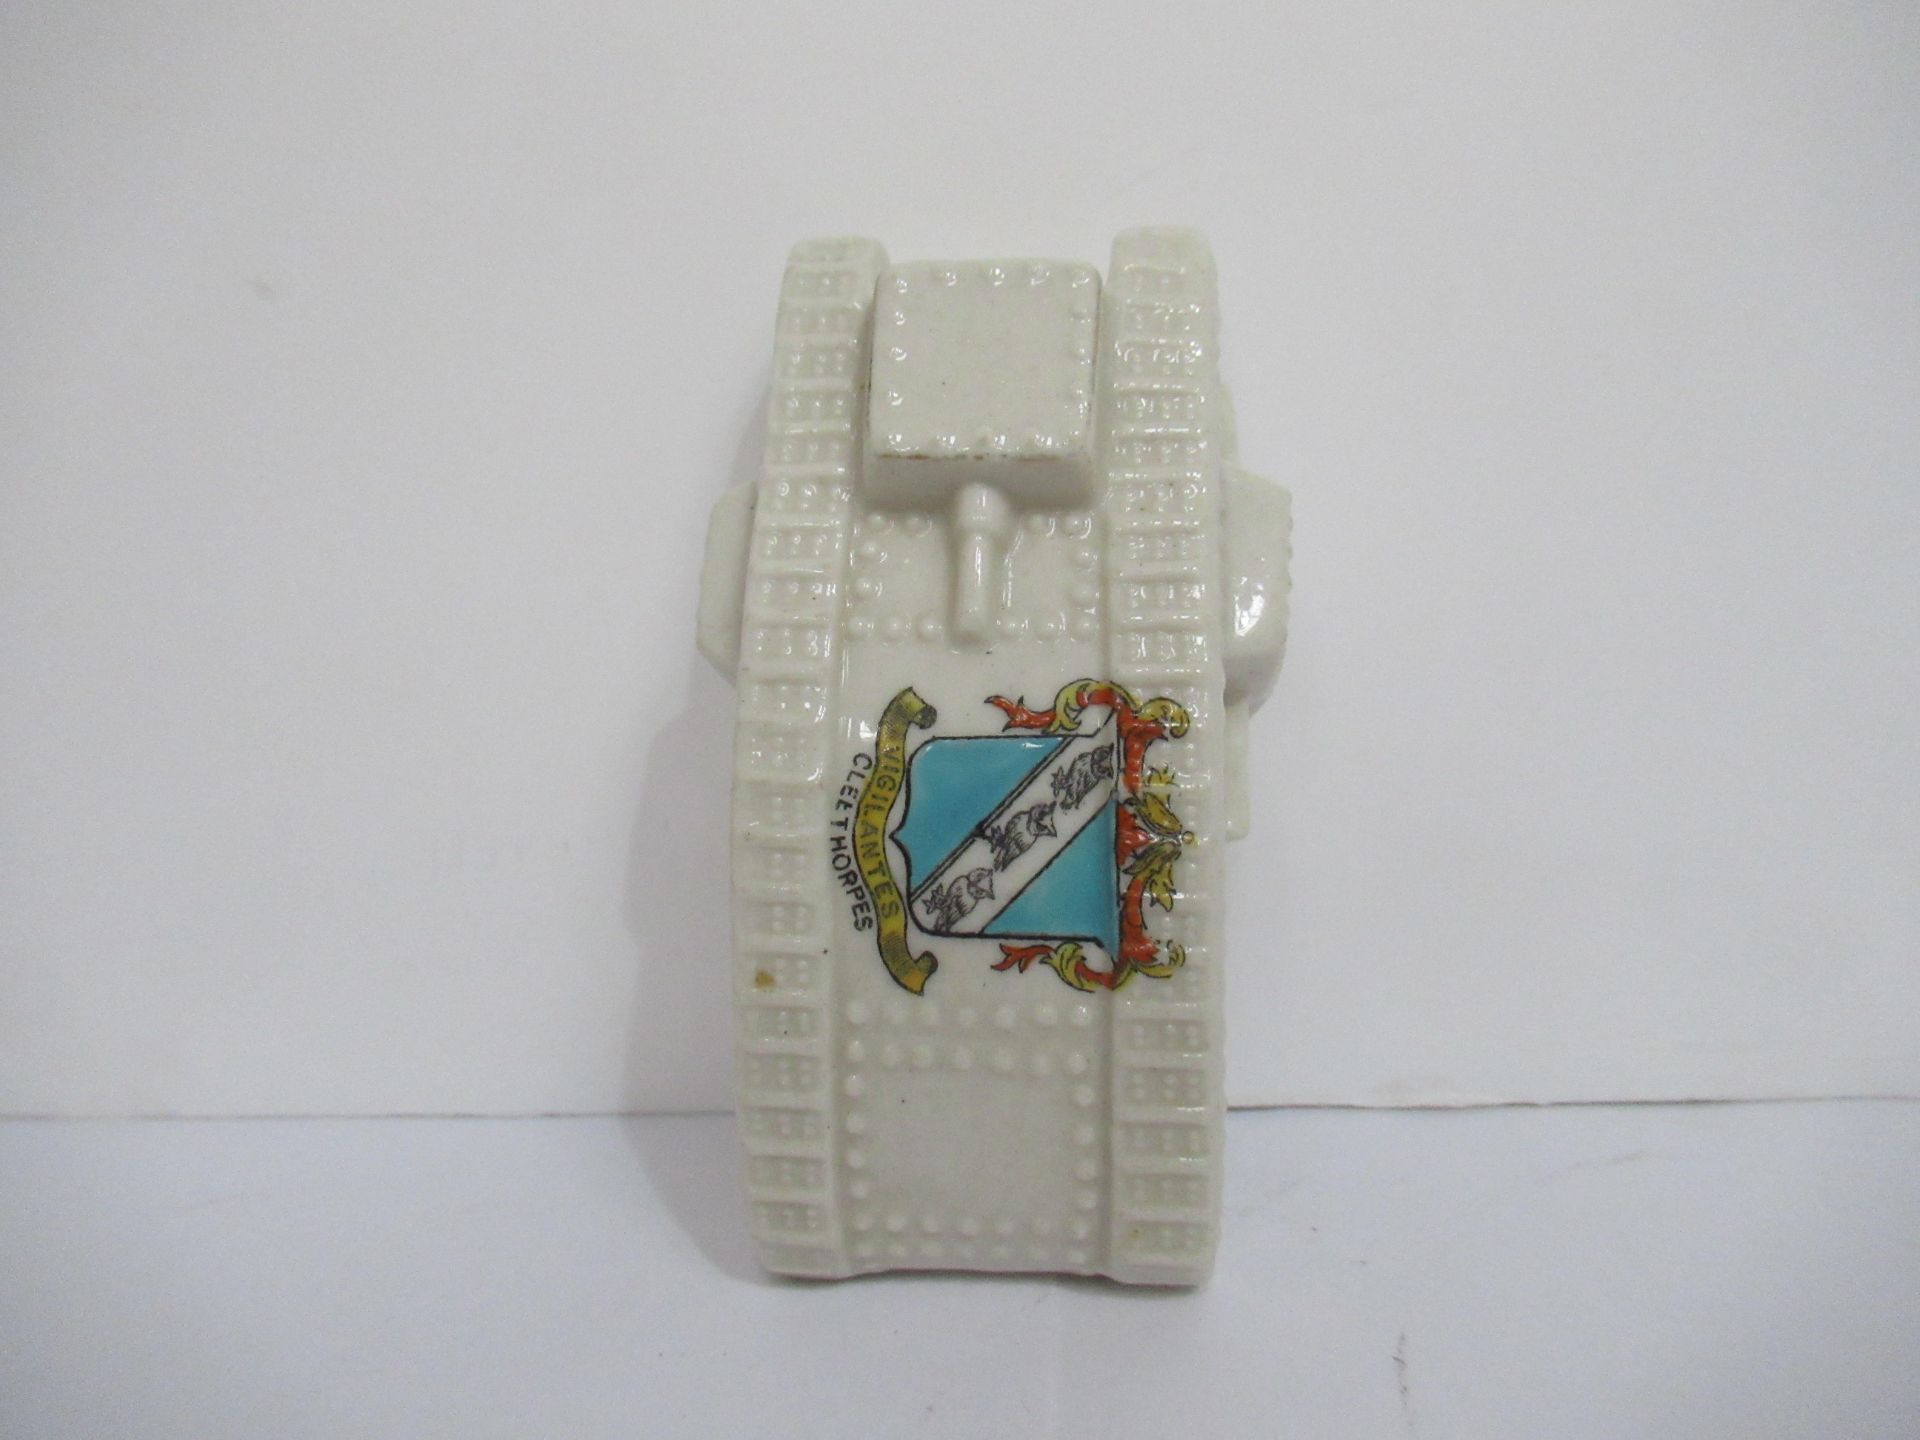 Crested China Arcadian model of tank with Grimsby coat of arms (90mm x 115mm) - Image 15 of 18